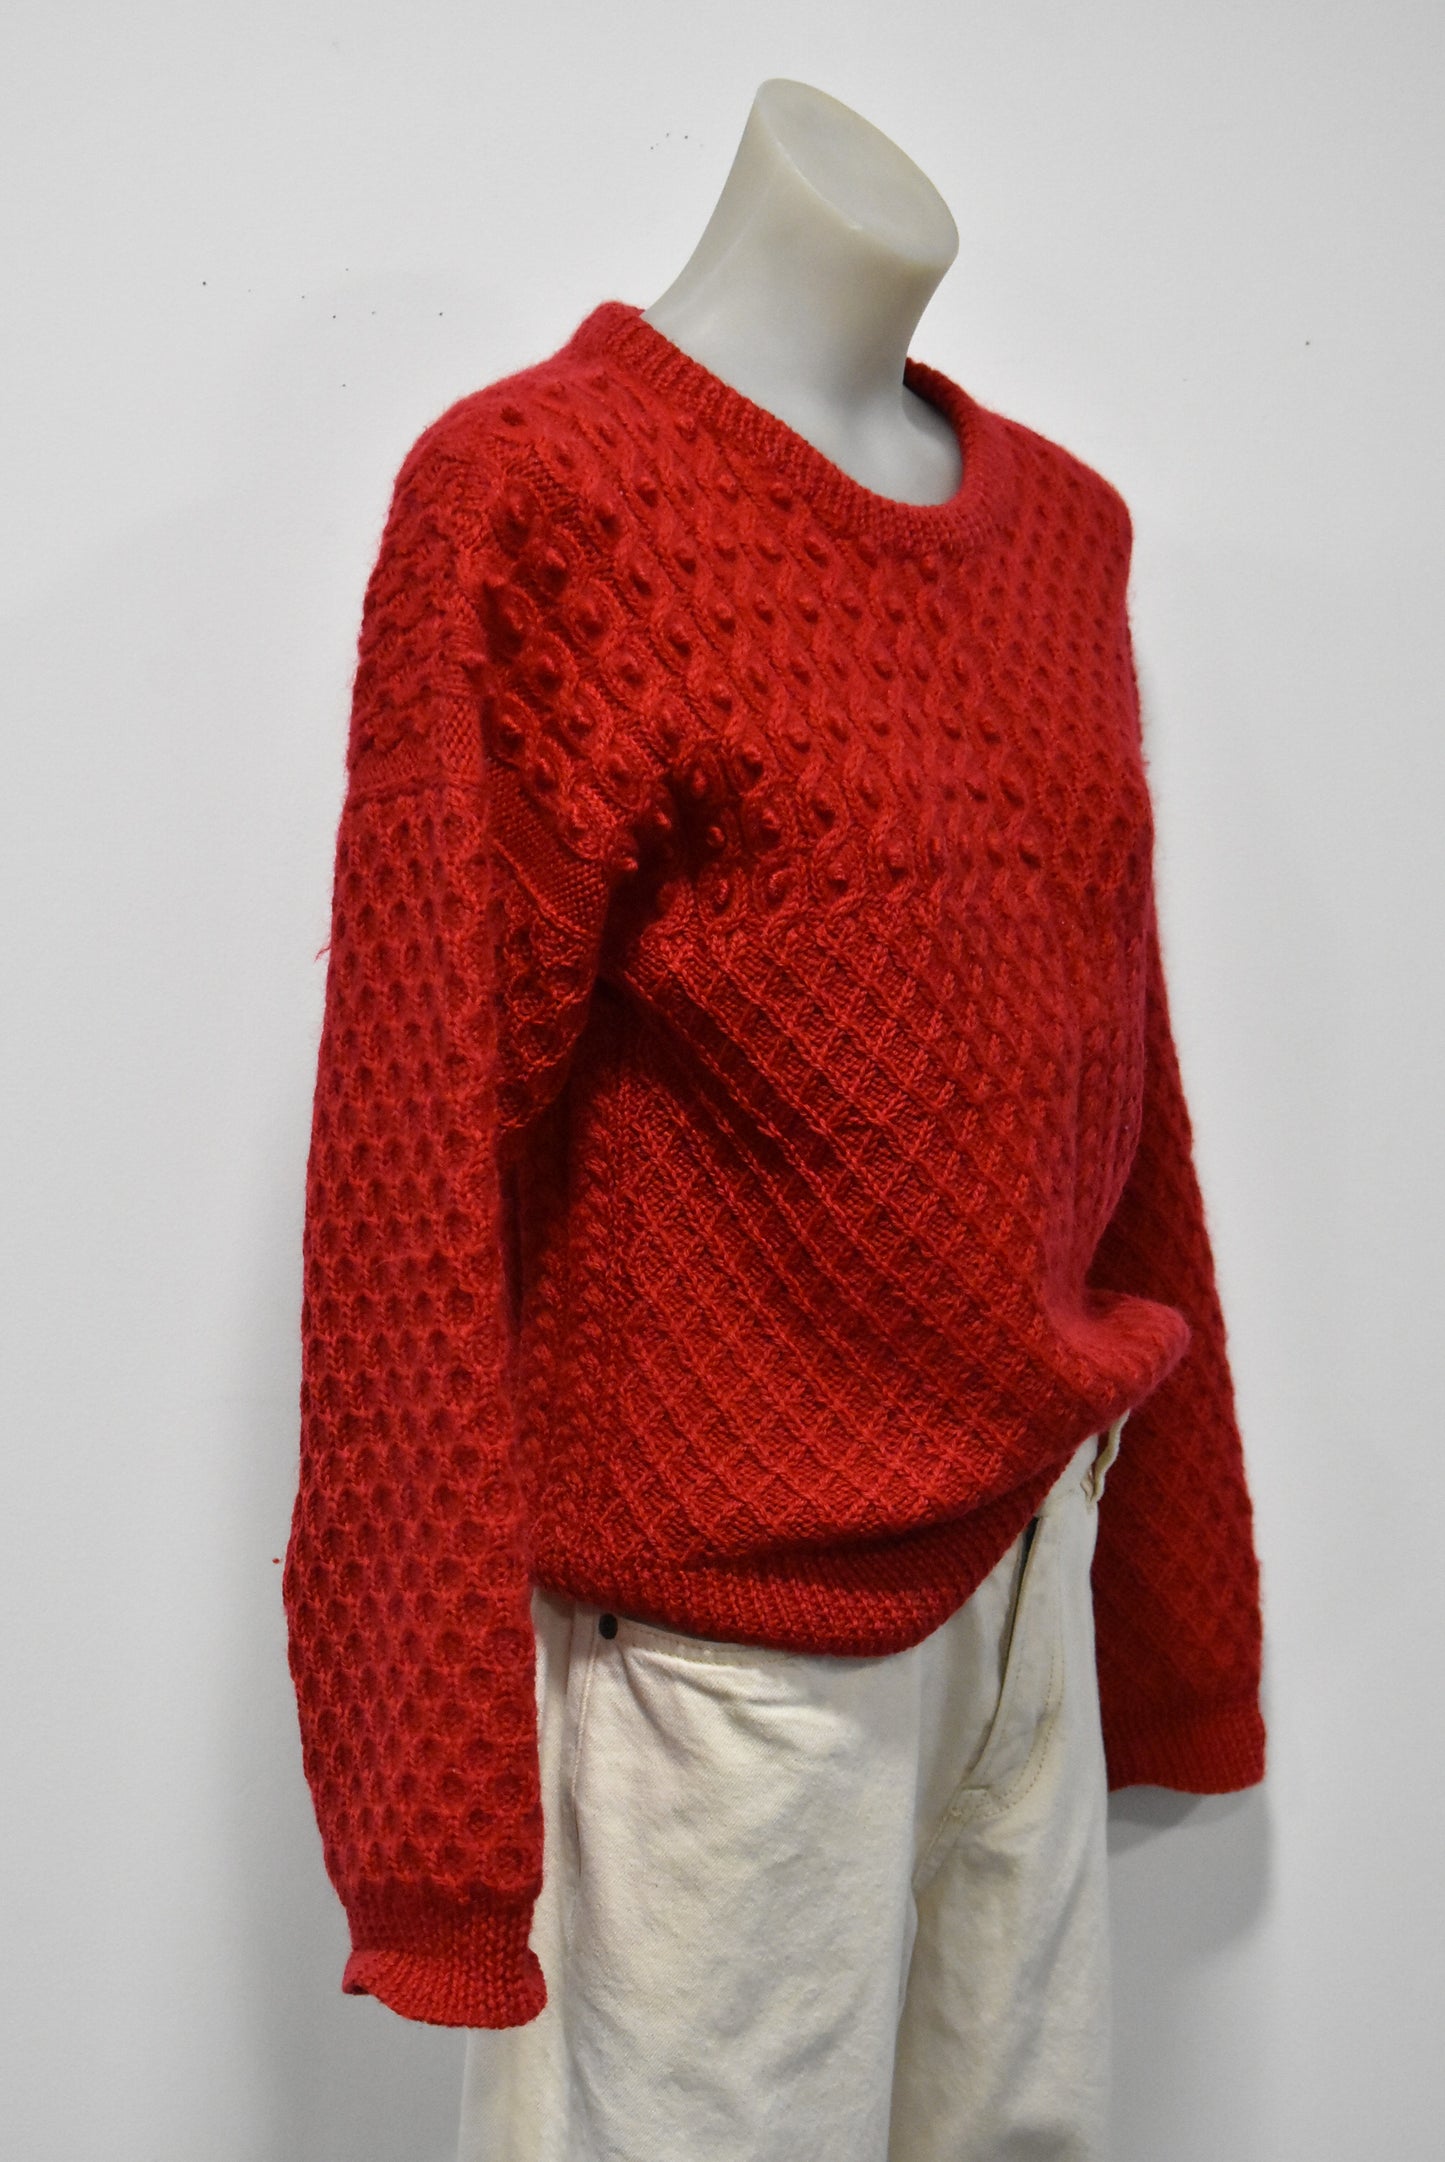 Red bobble and cable knit wool jumper, S/M